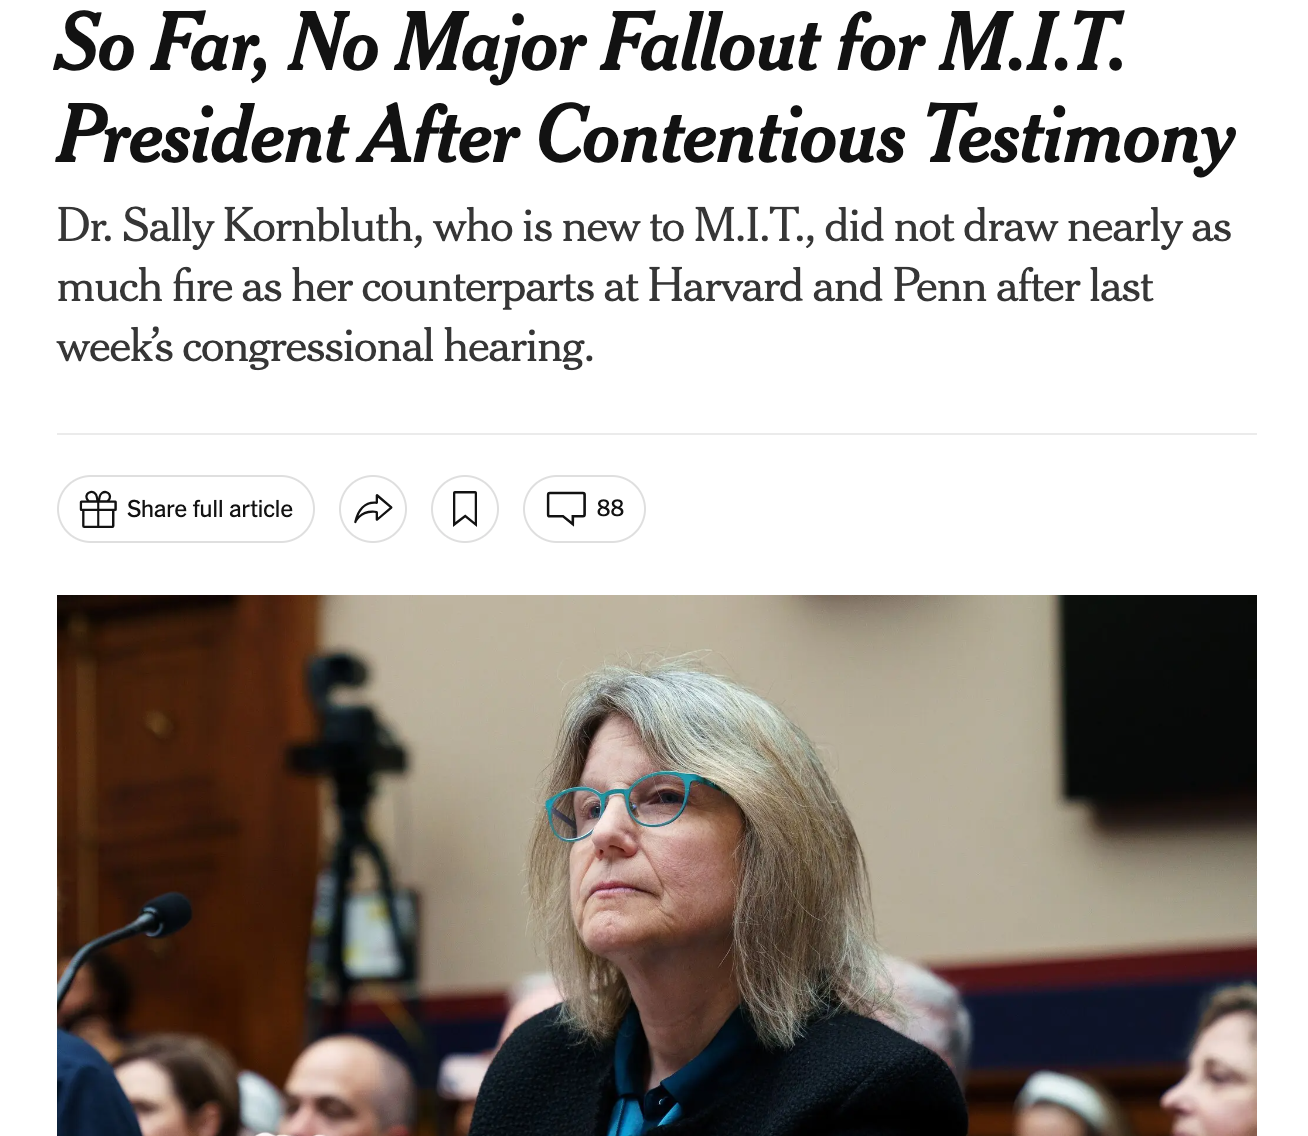 Prof Mary Fuller featured in New York Times article, “So Far, No Major Fallout for M.I.T. President After Contentious Testimony”